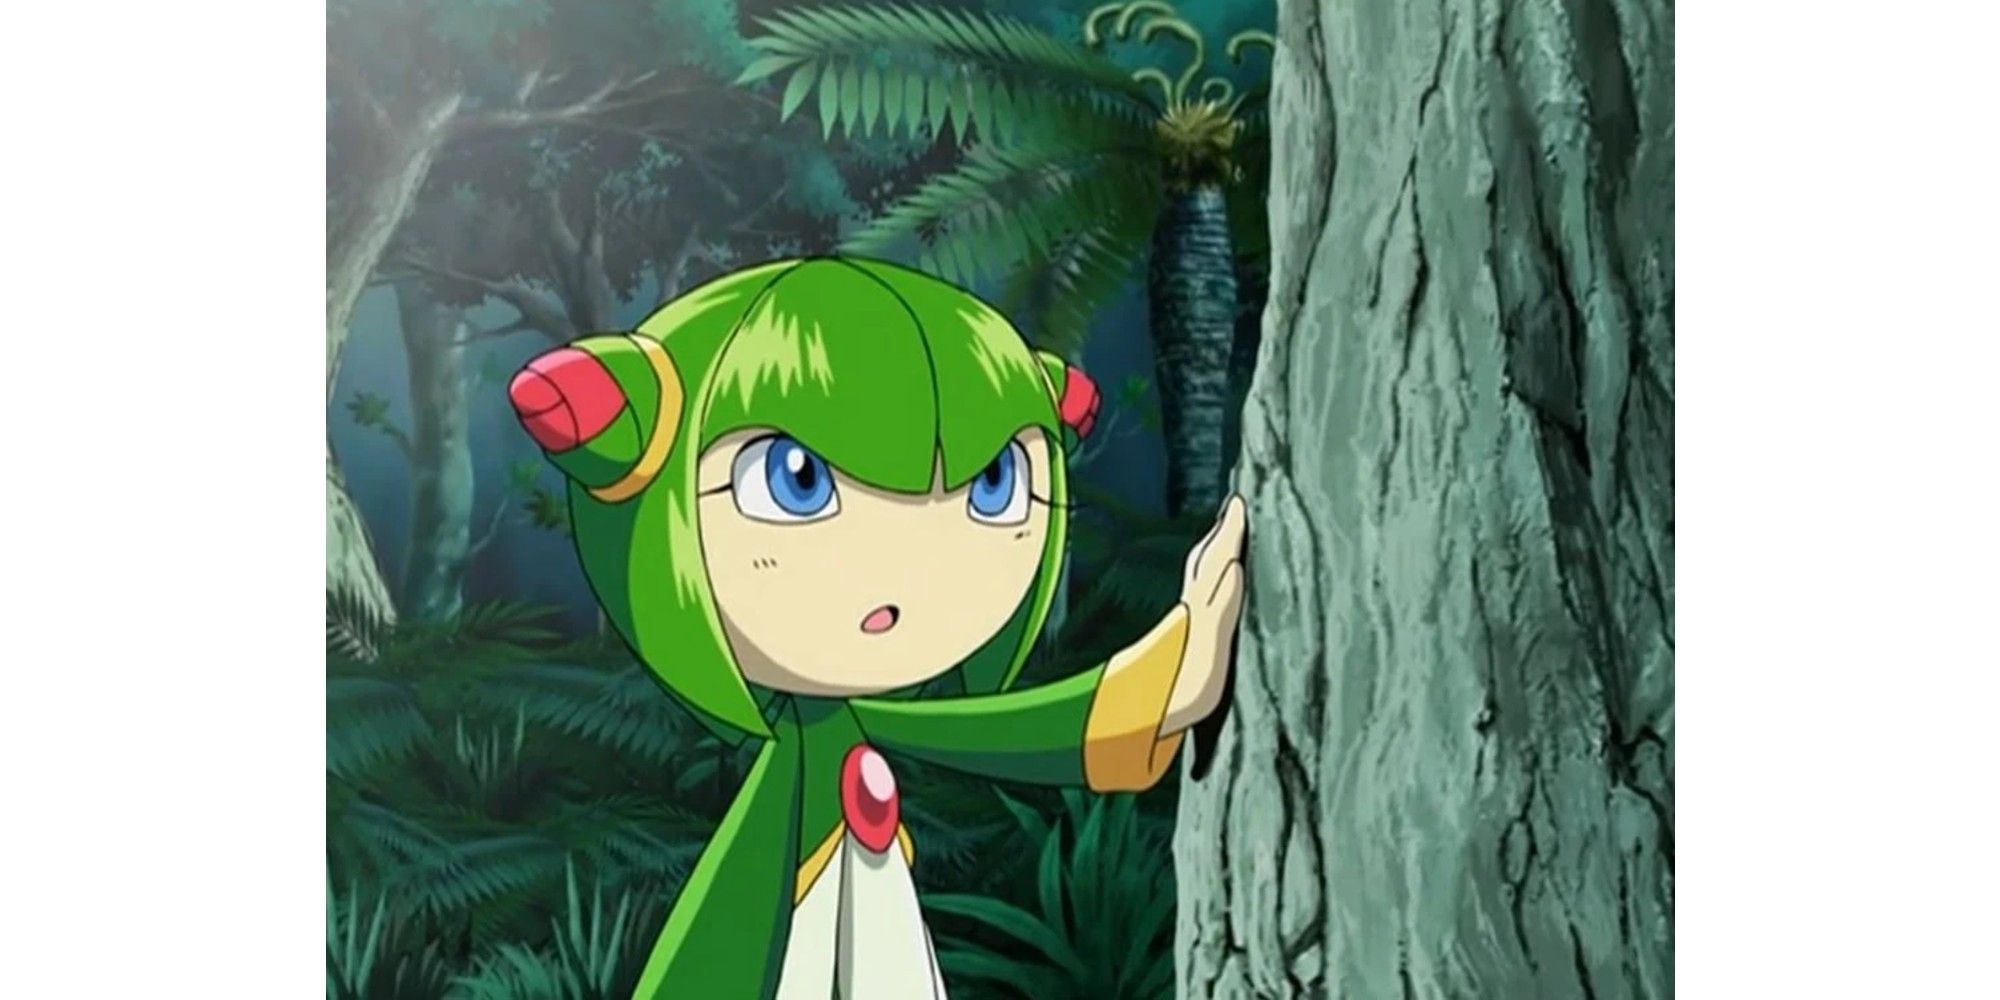 Screencap of Cosmo from Sonic x.